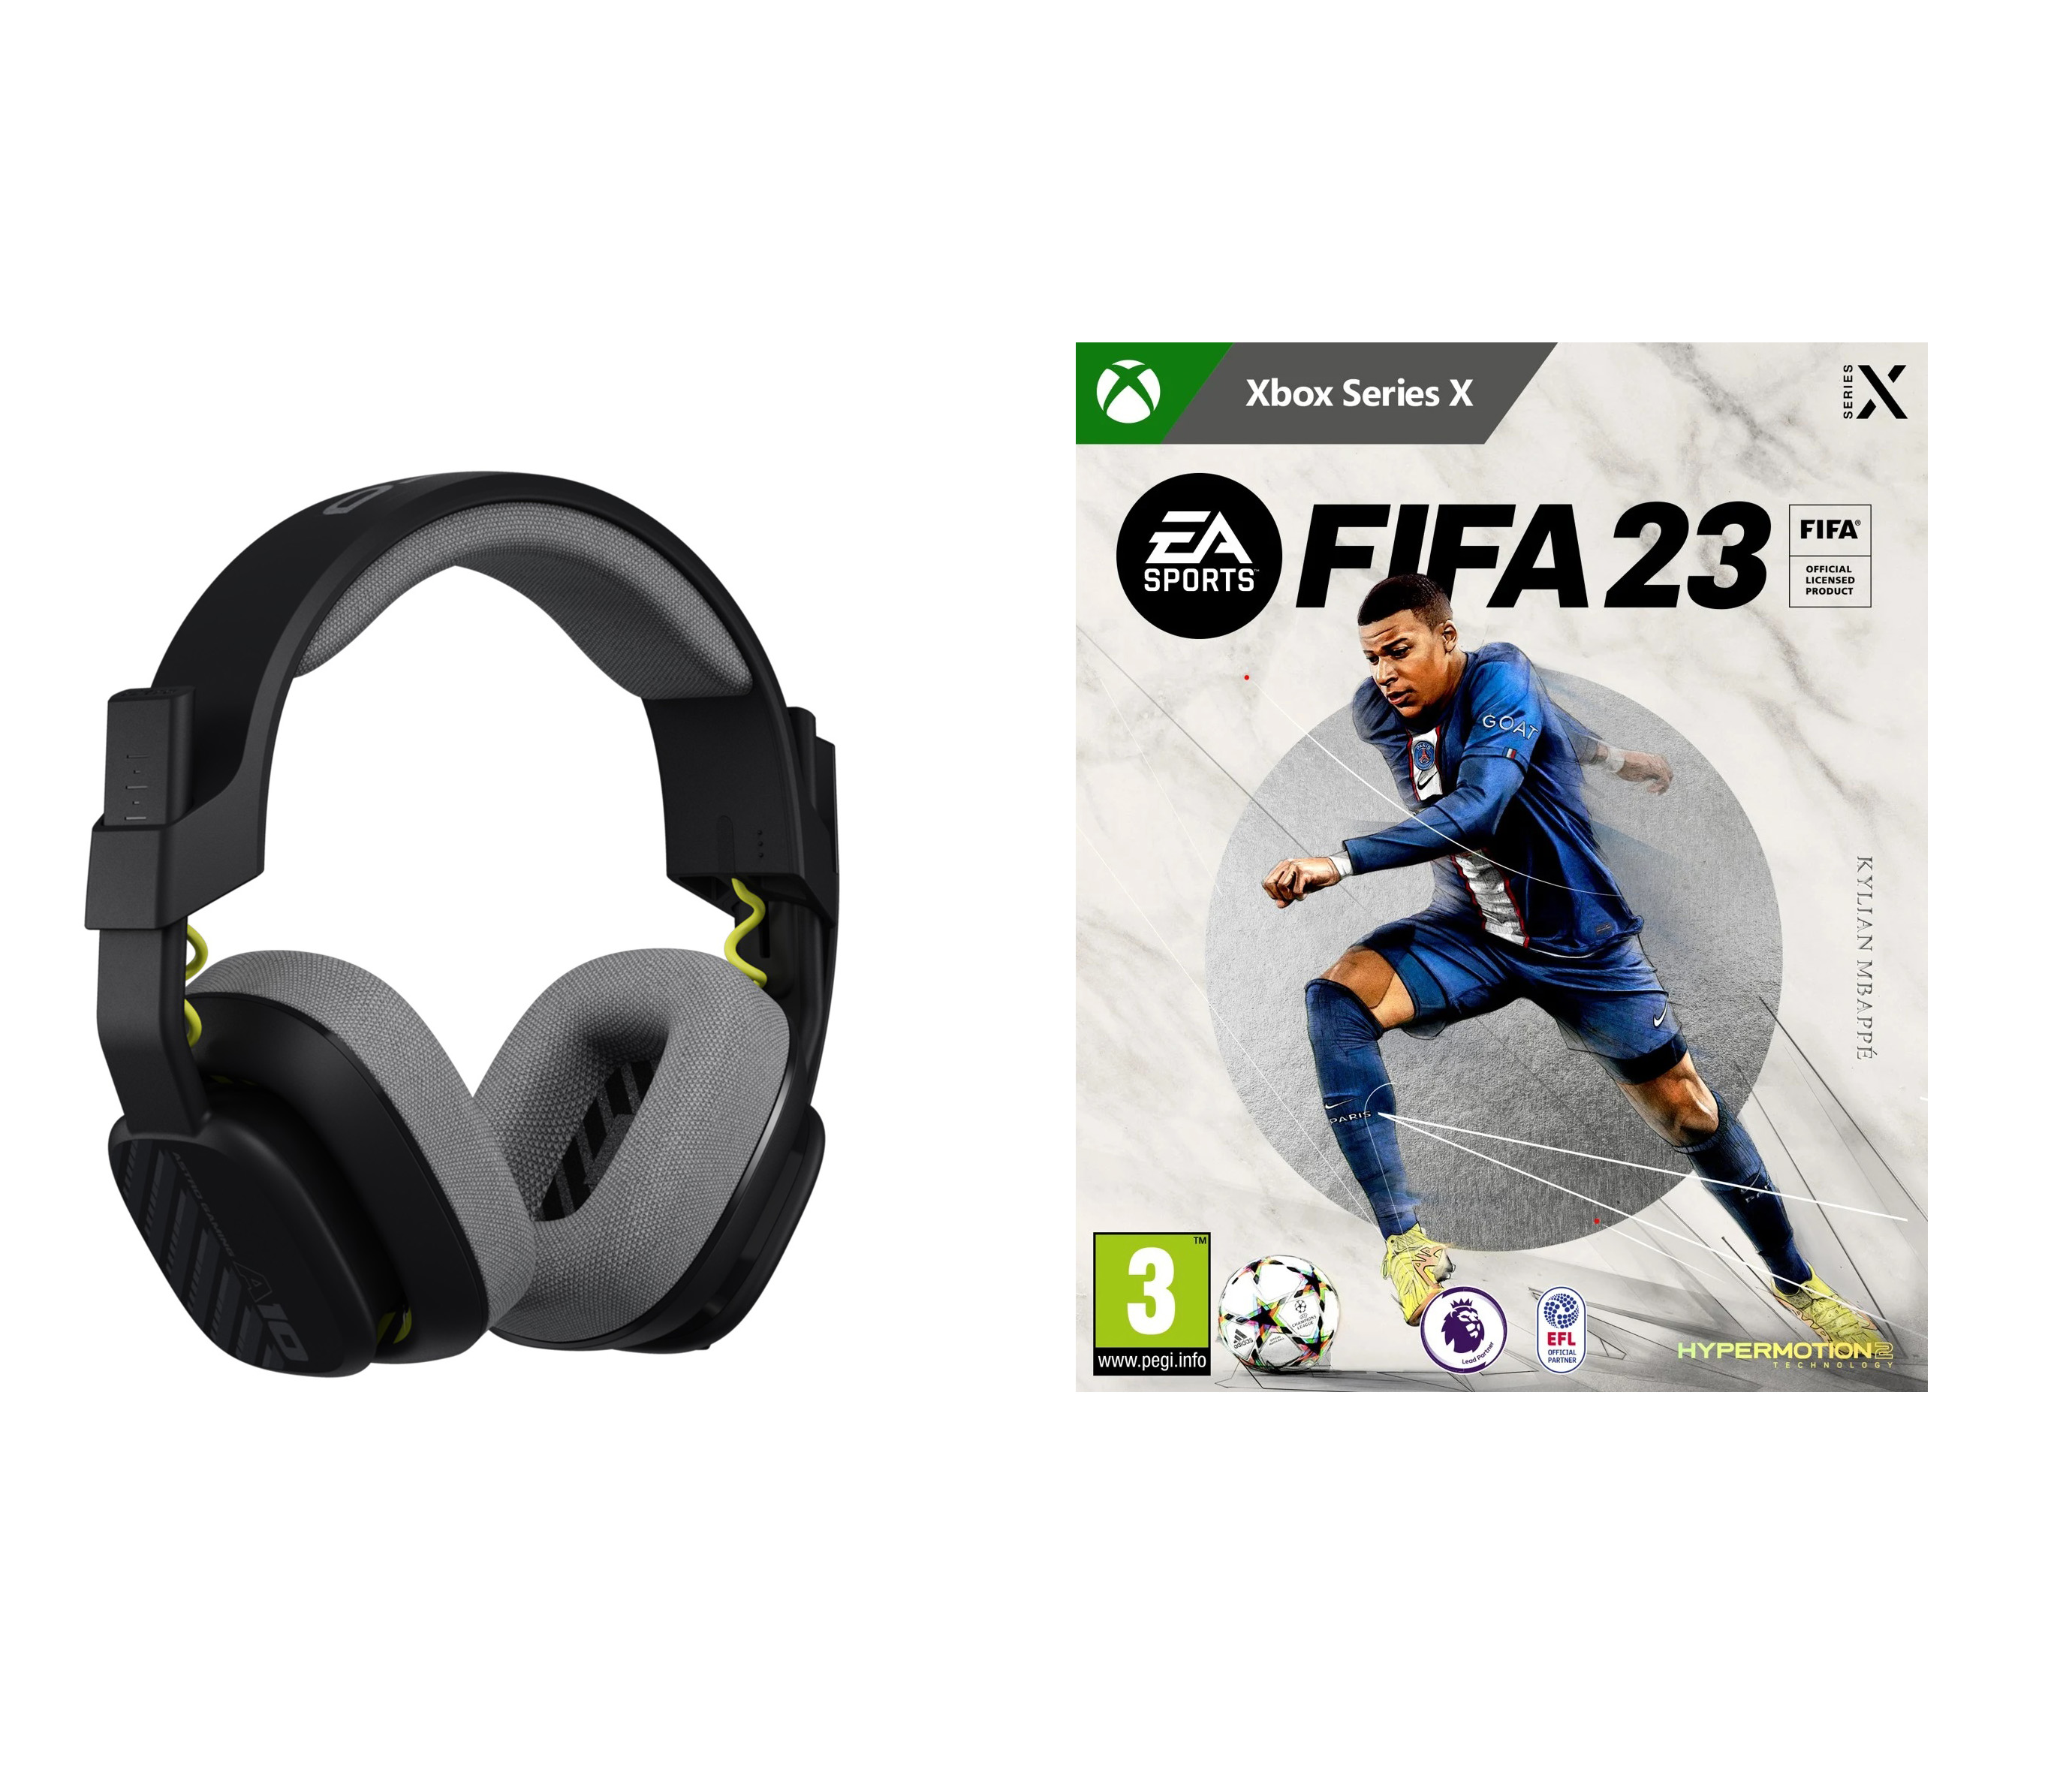 Astro - A10 Gen 2 Wired Gaming headset for XB1-S,X + FIFA 23 (Nordic)